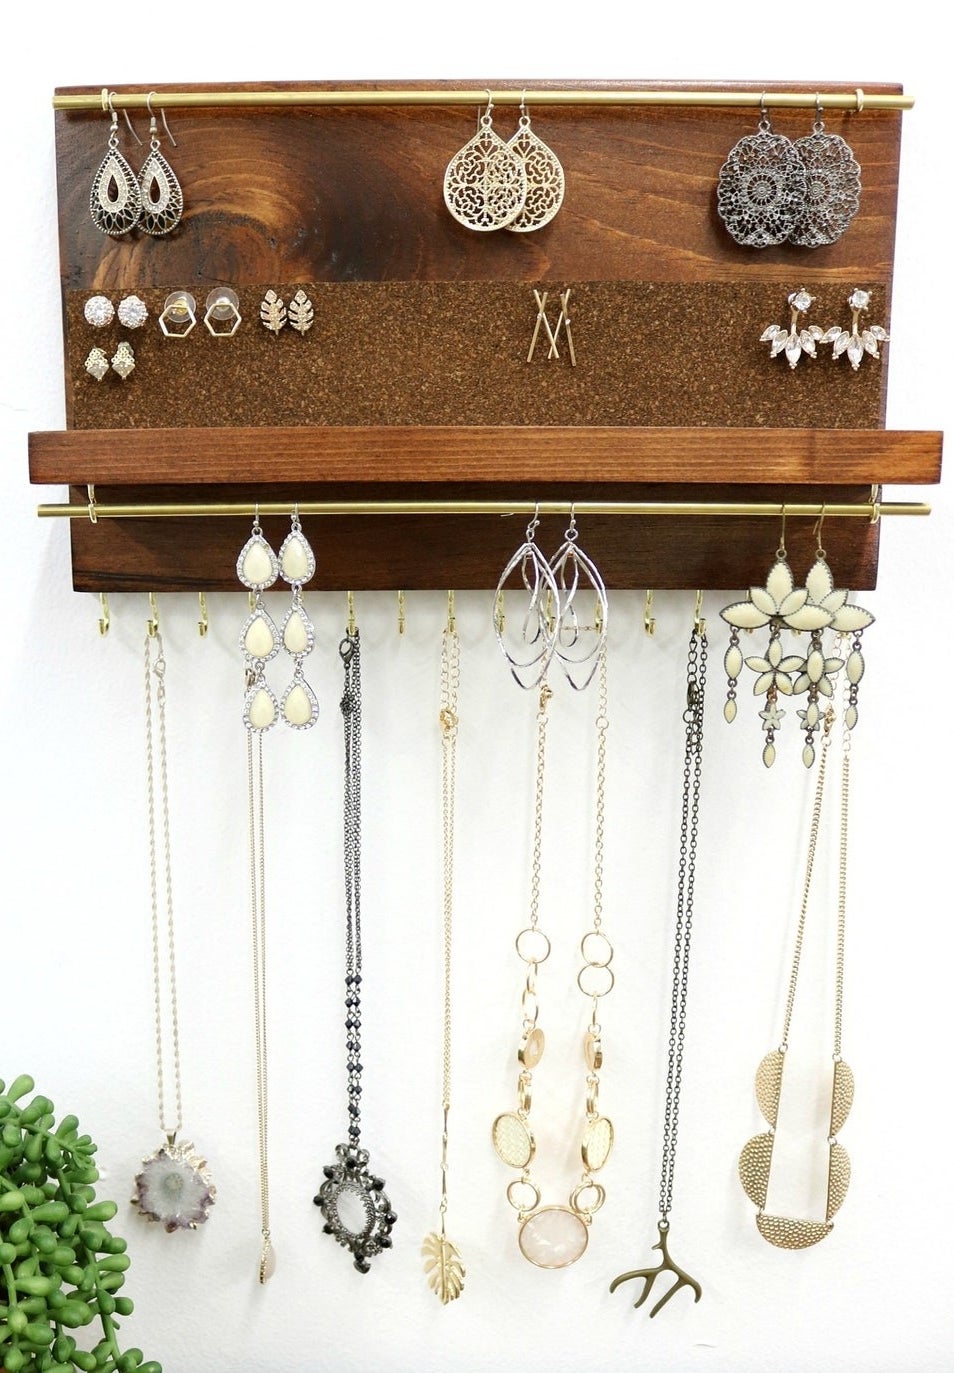 A wooden organizer with gold bars and hooks for storing necklaces, earrings, and other jewelry